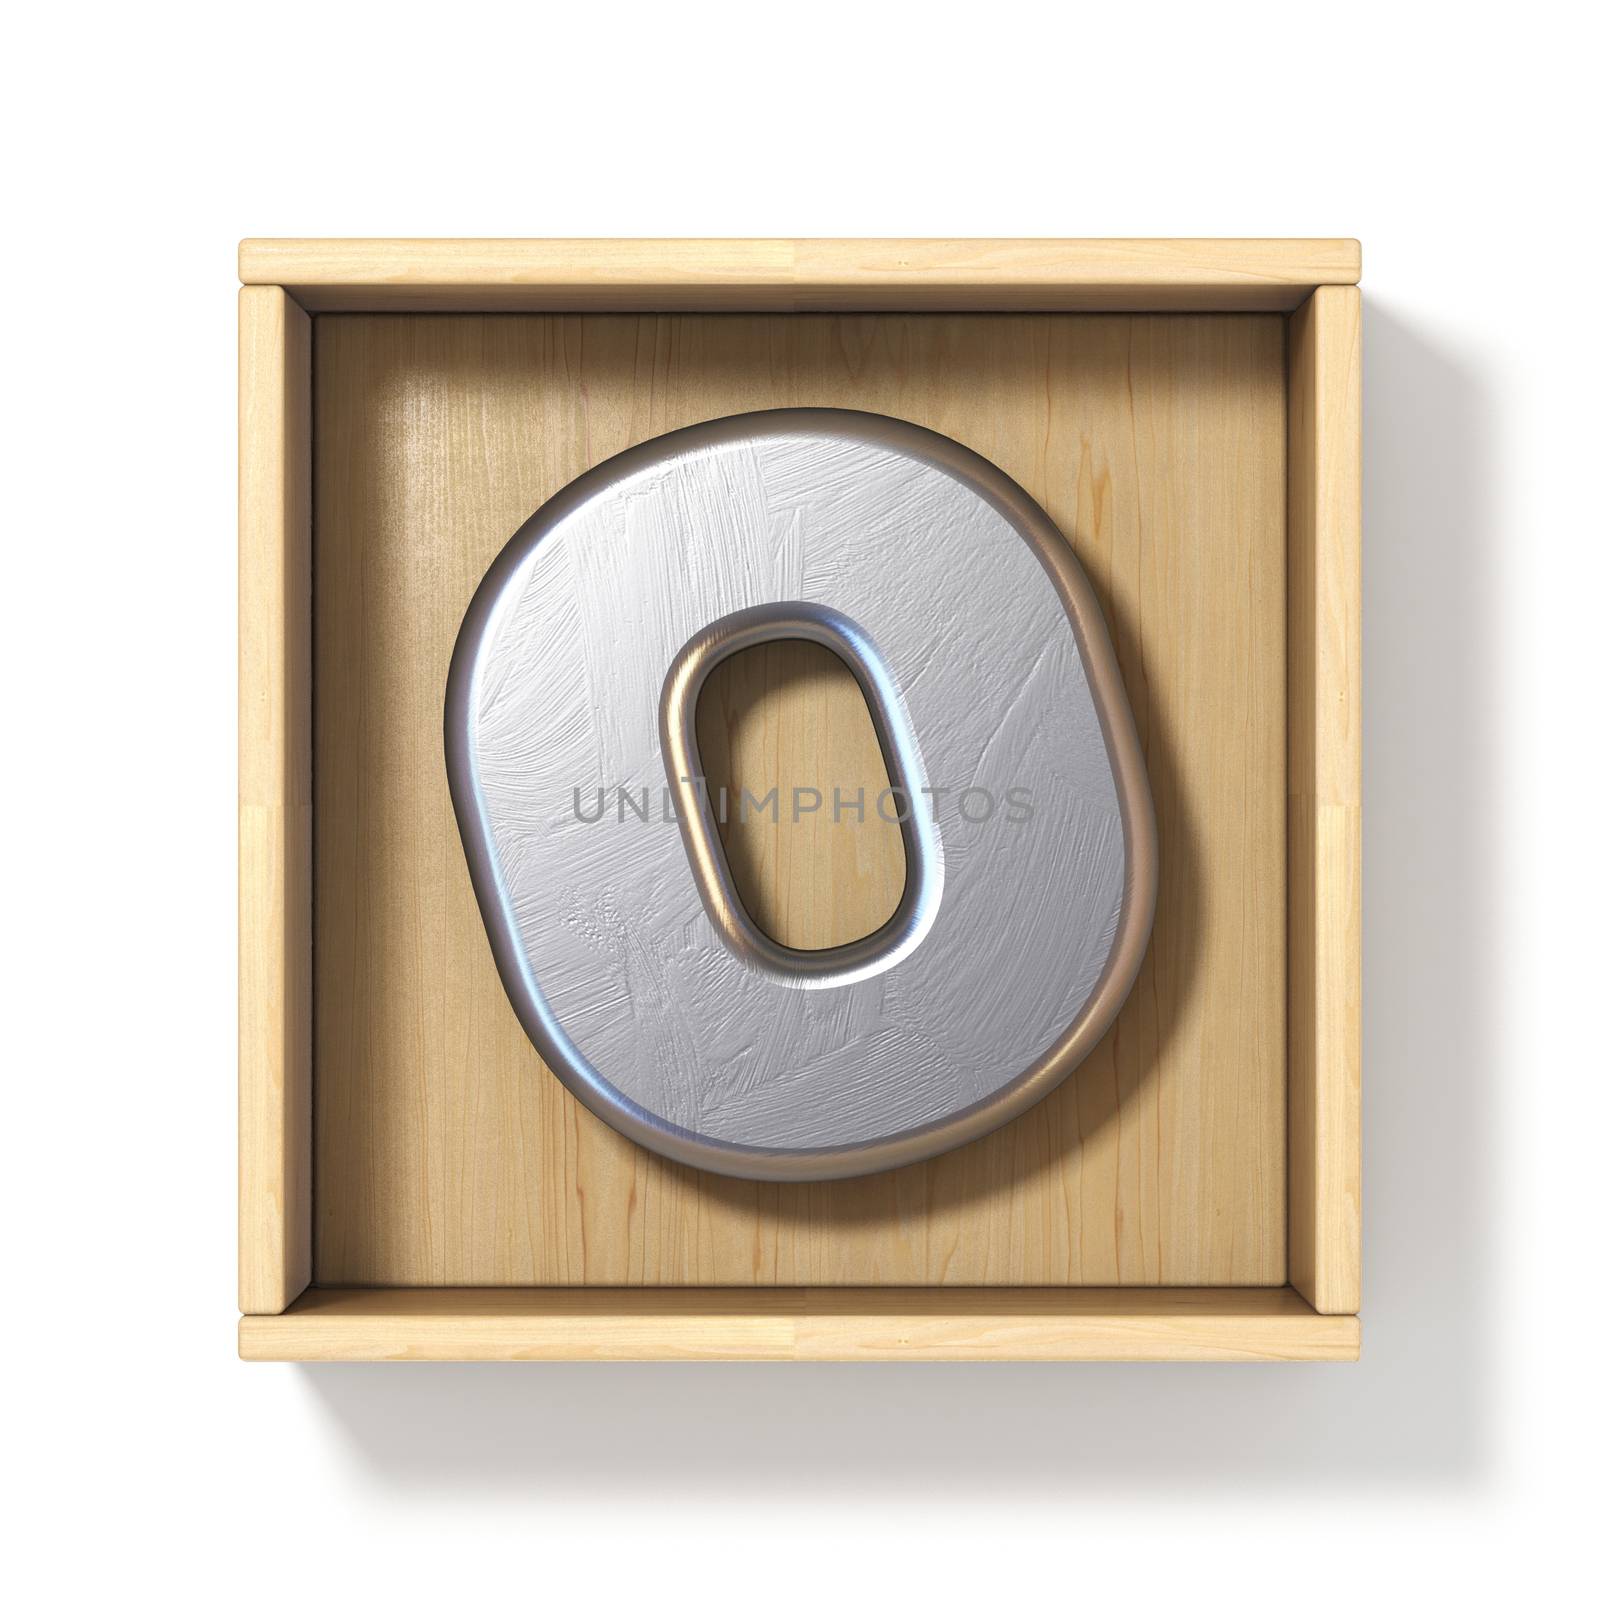 Silver metal letter O in wooden box 3D render illustration isolated on white background